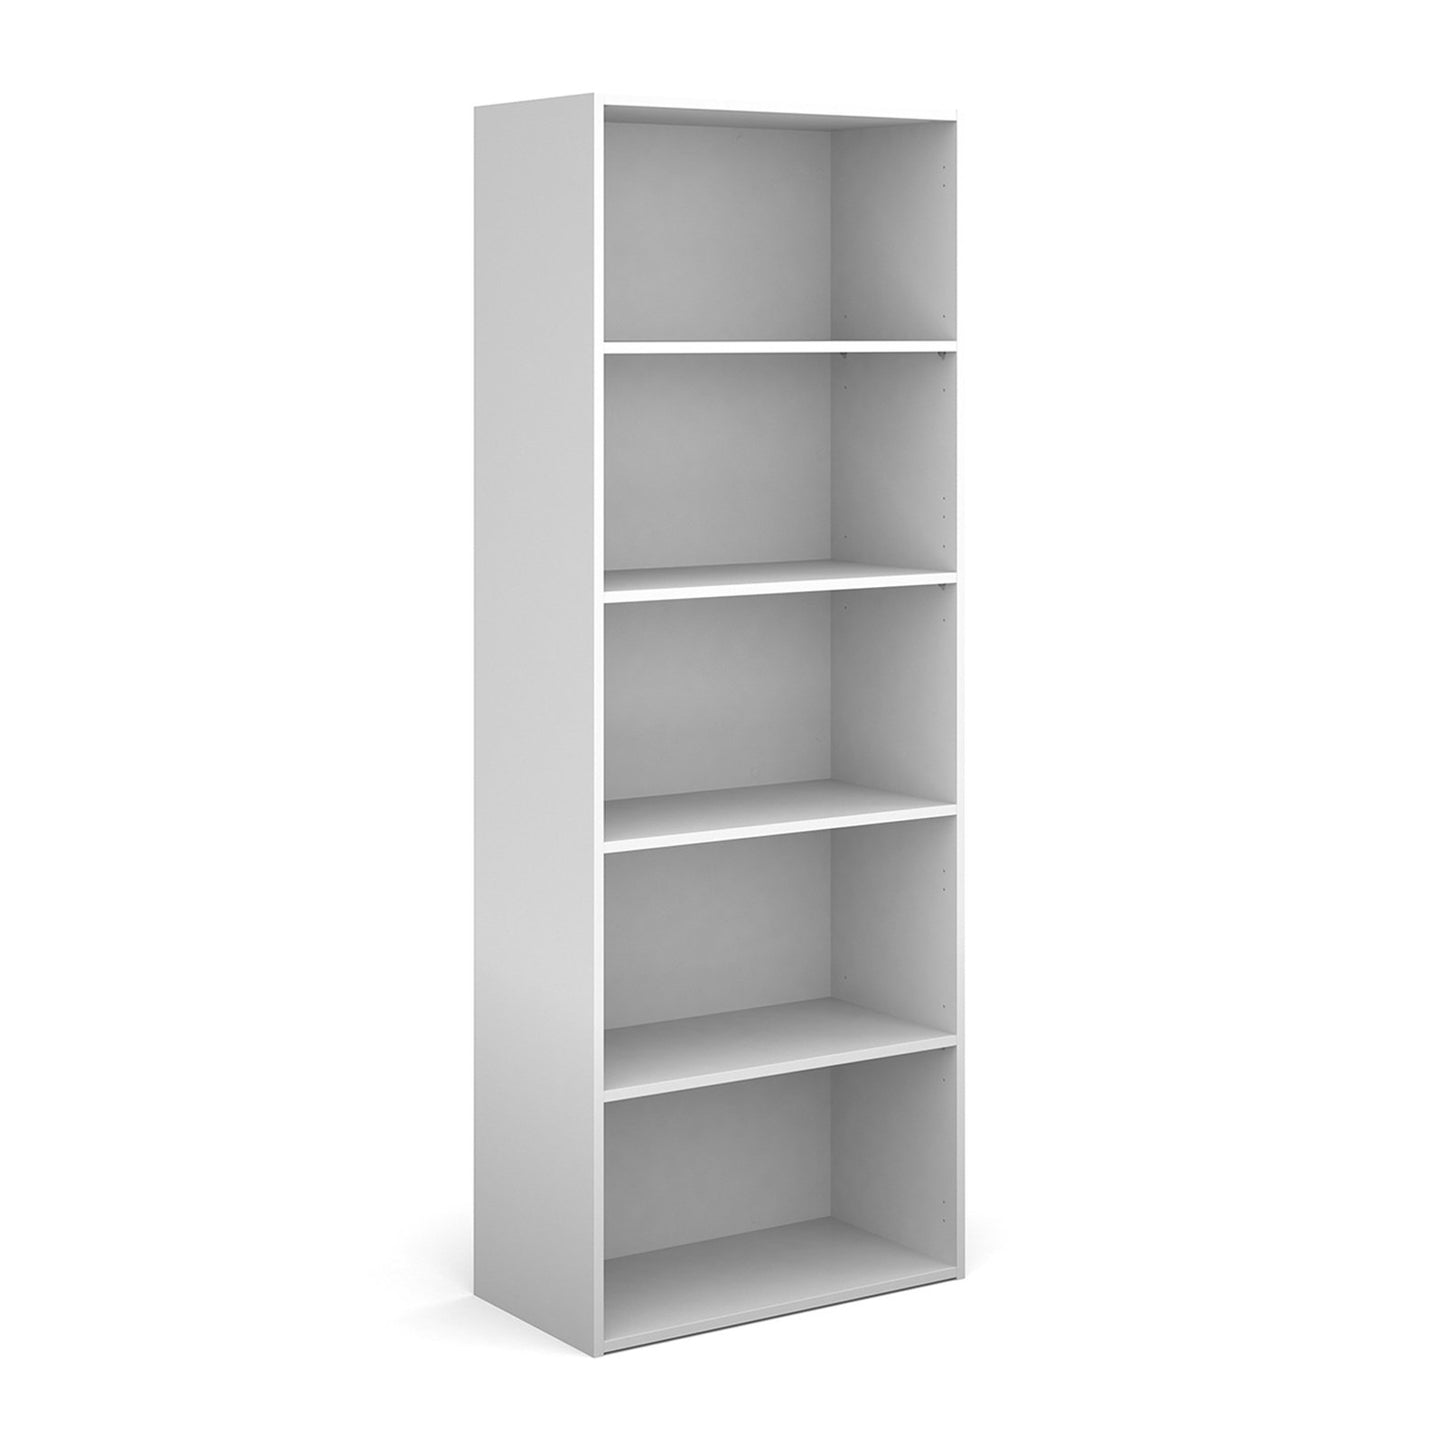 Contract bookcase With Shelves 1230mm High - Oak